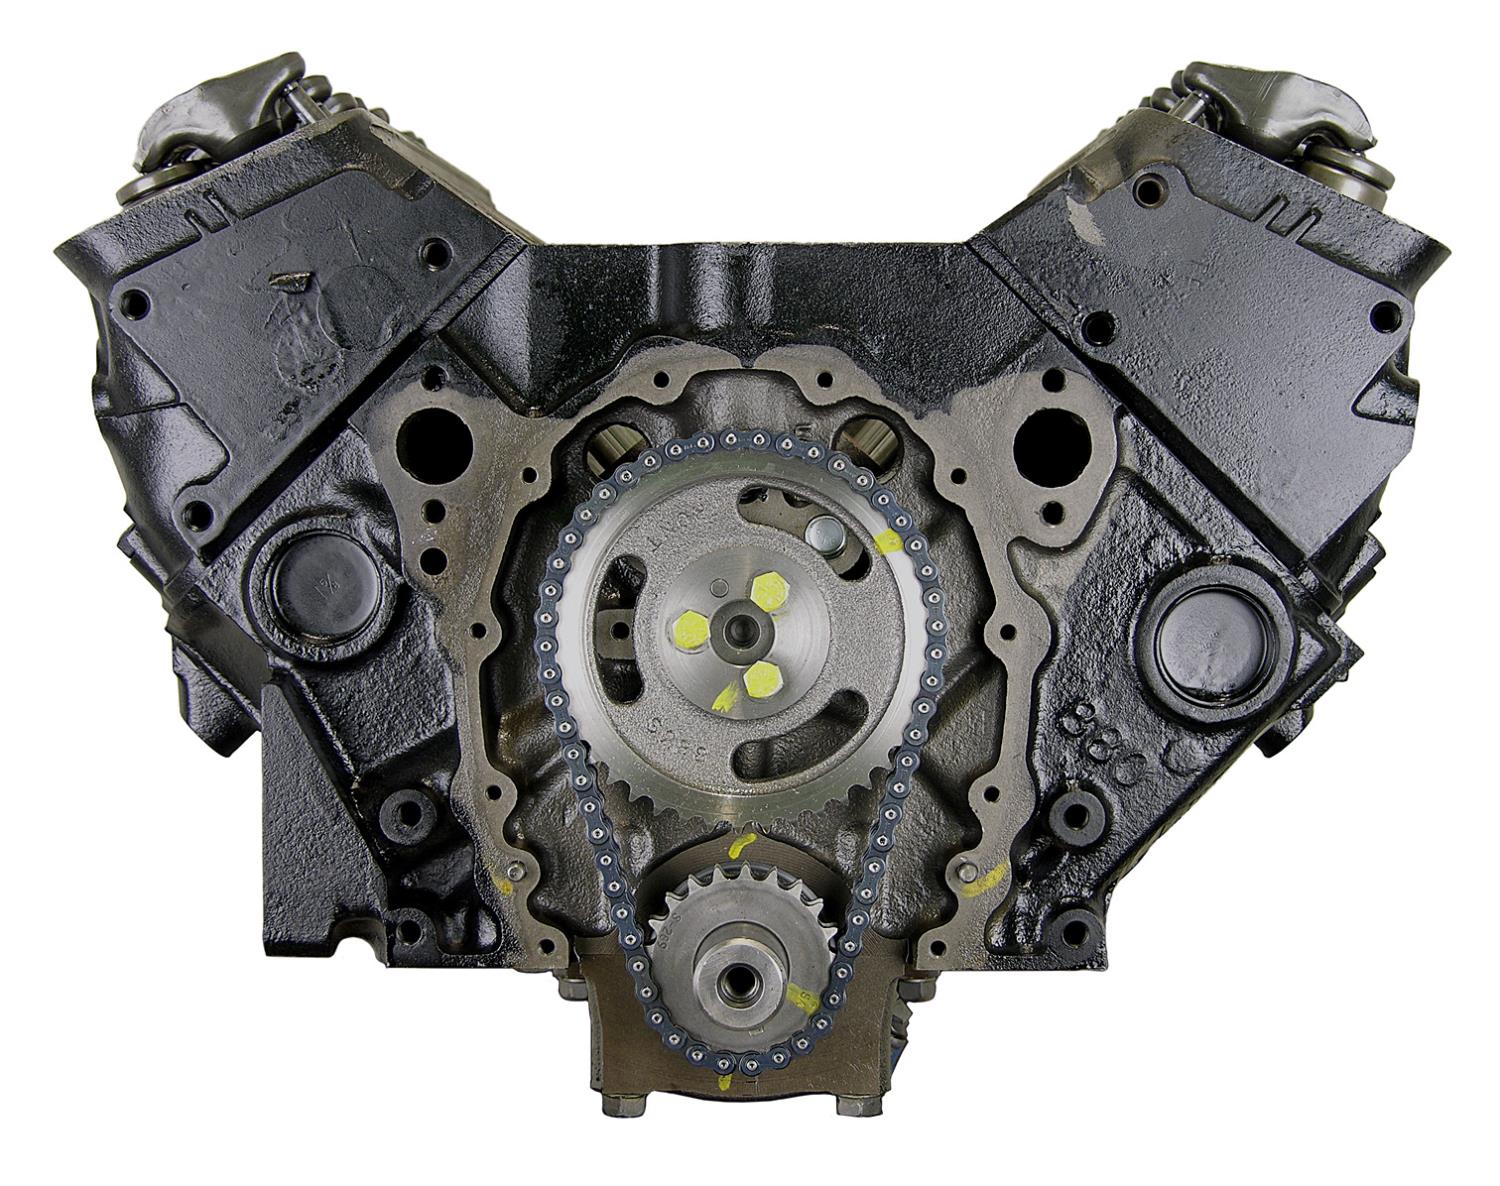 Remanufactured Crate Engine for Marine Applications with 1987-1995 Small Block Chevy 350ci/5.7L